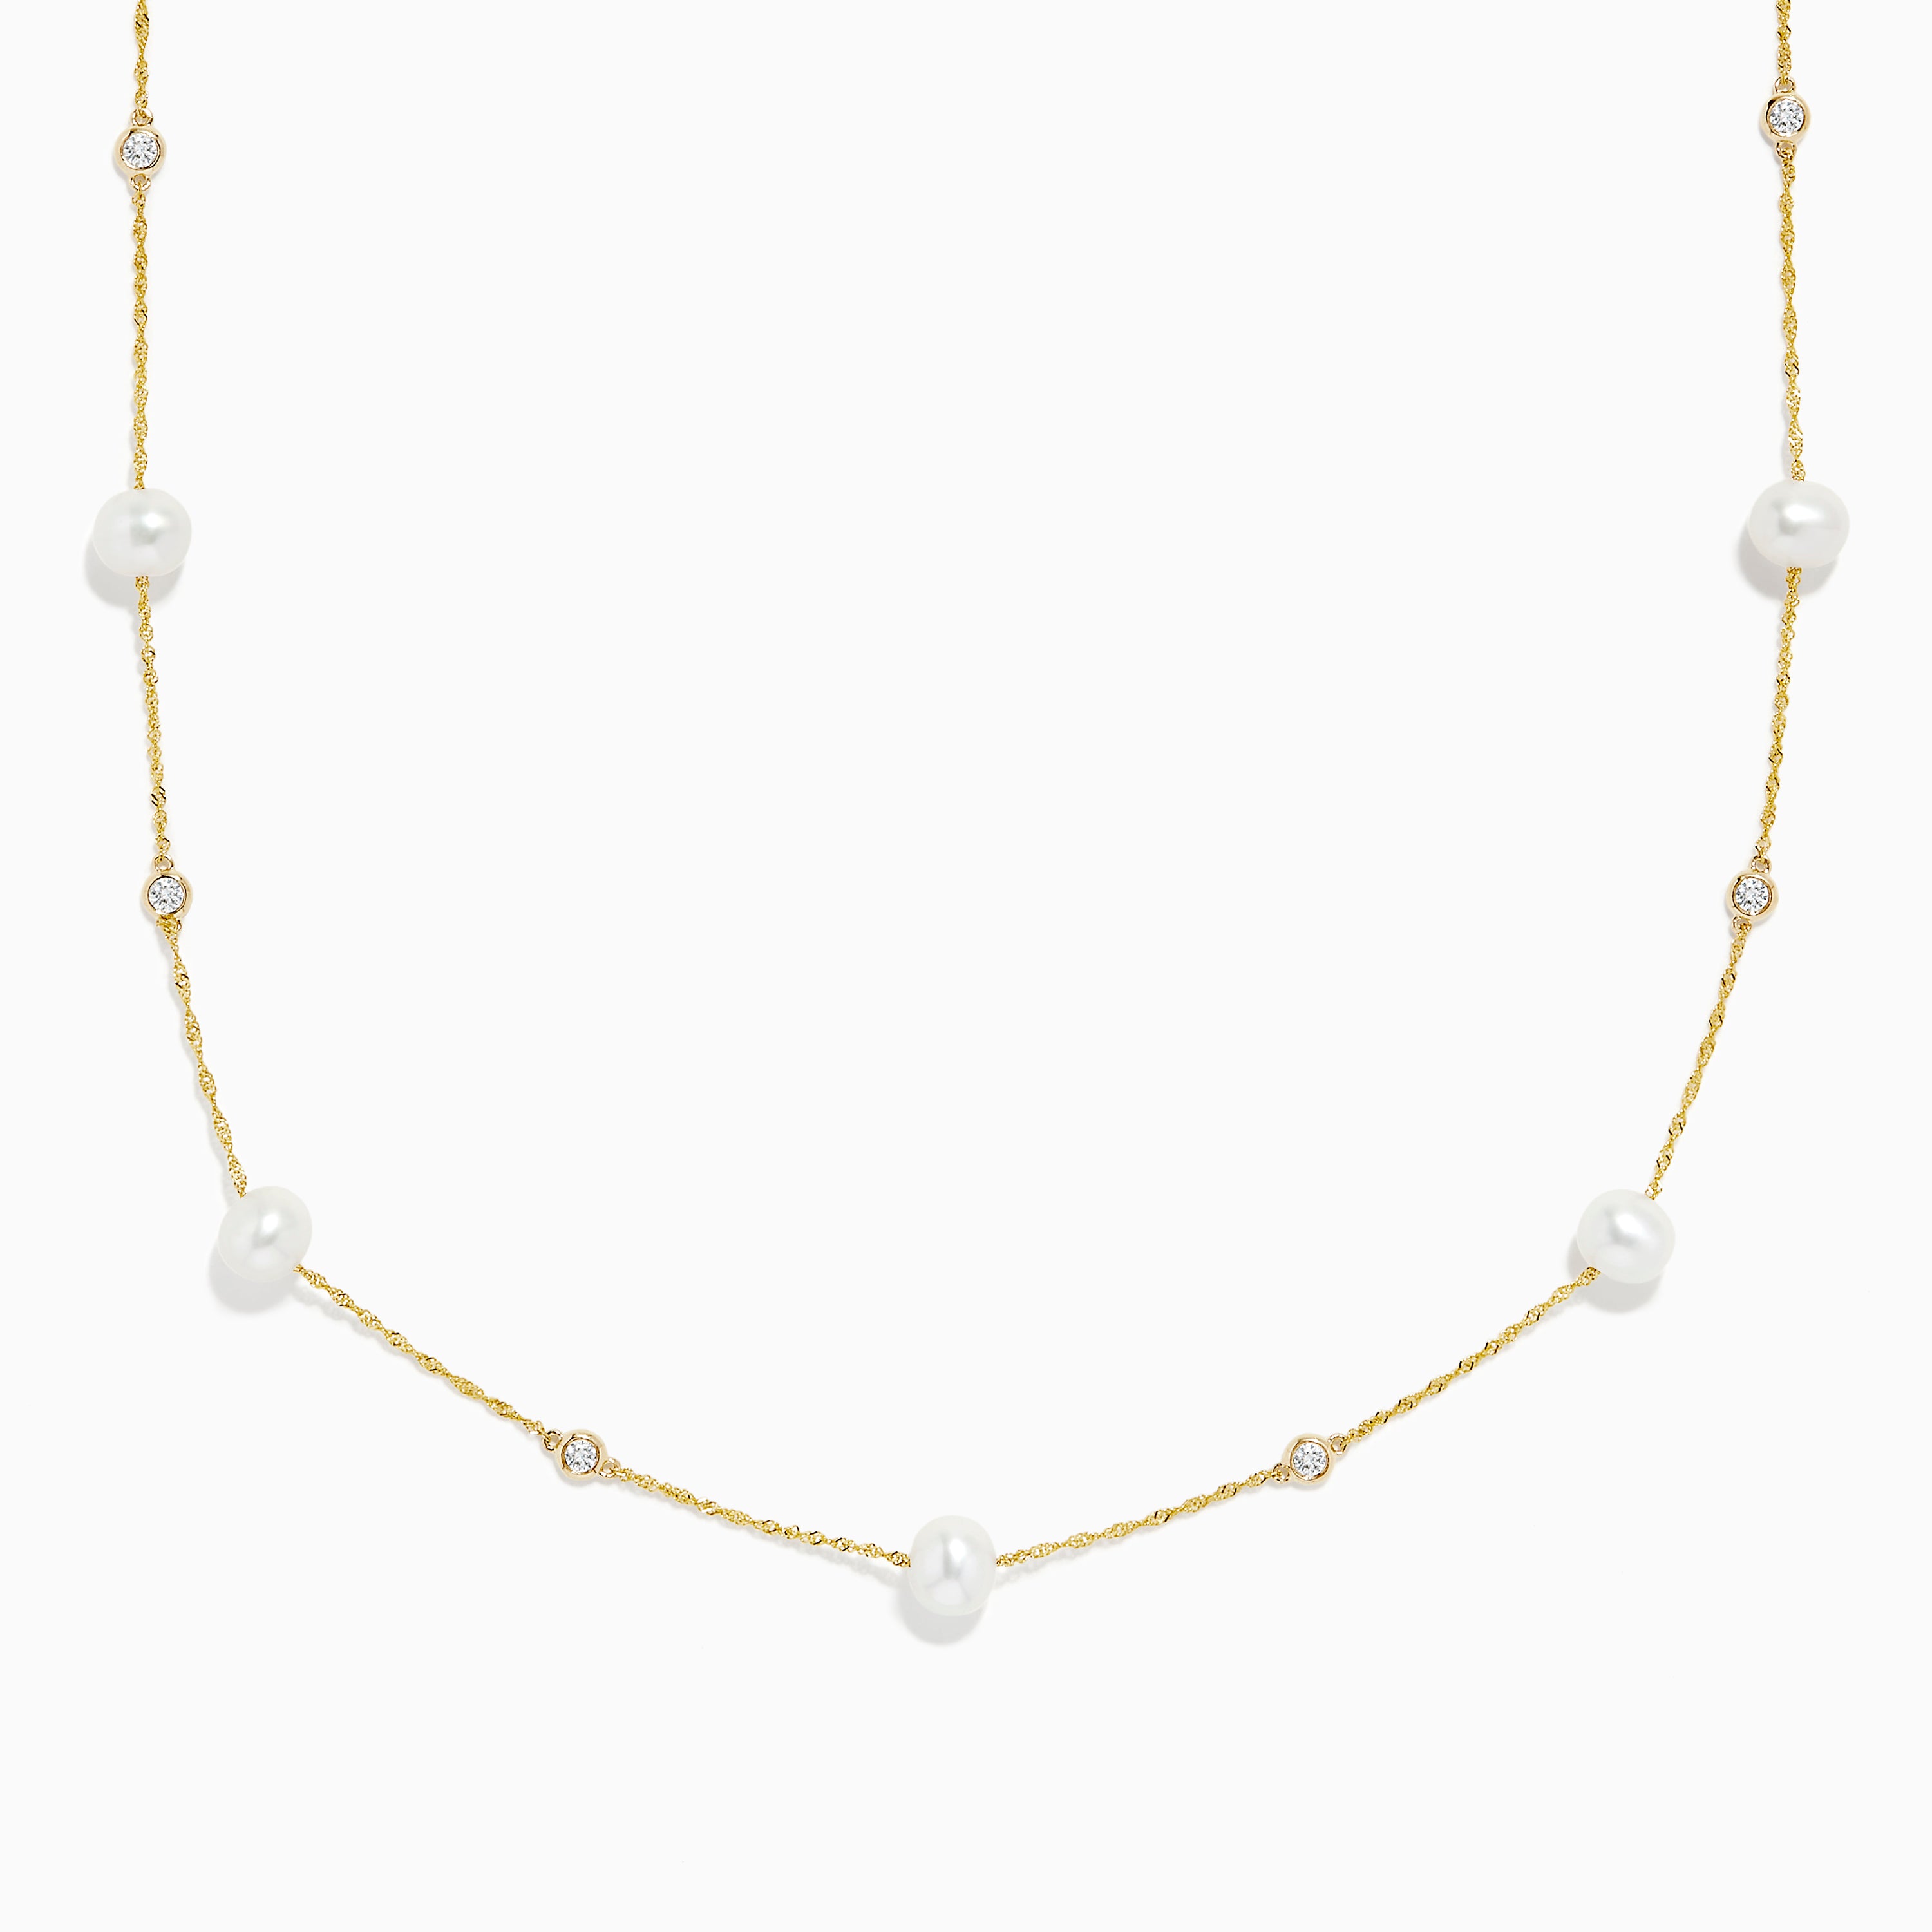 Effy 14K Yellow Gold Pearl and Diamond Station Necklace